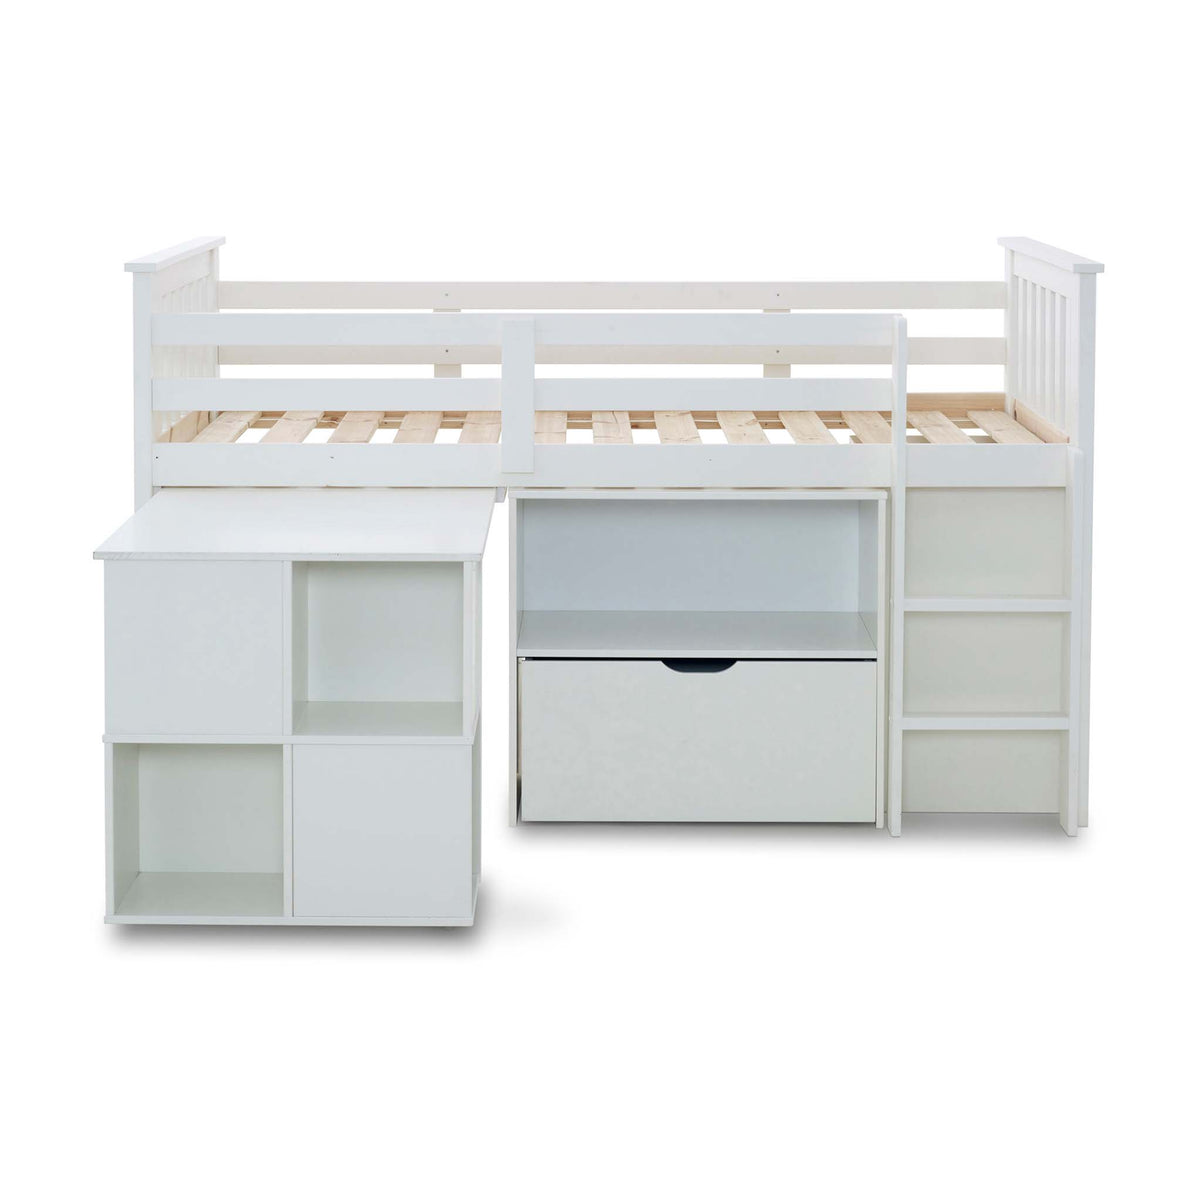 side view of the Huckerby White Childrens Sleep Station Storage Bed with storage desk